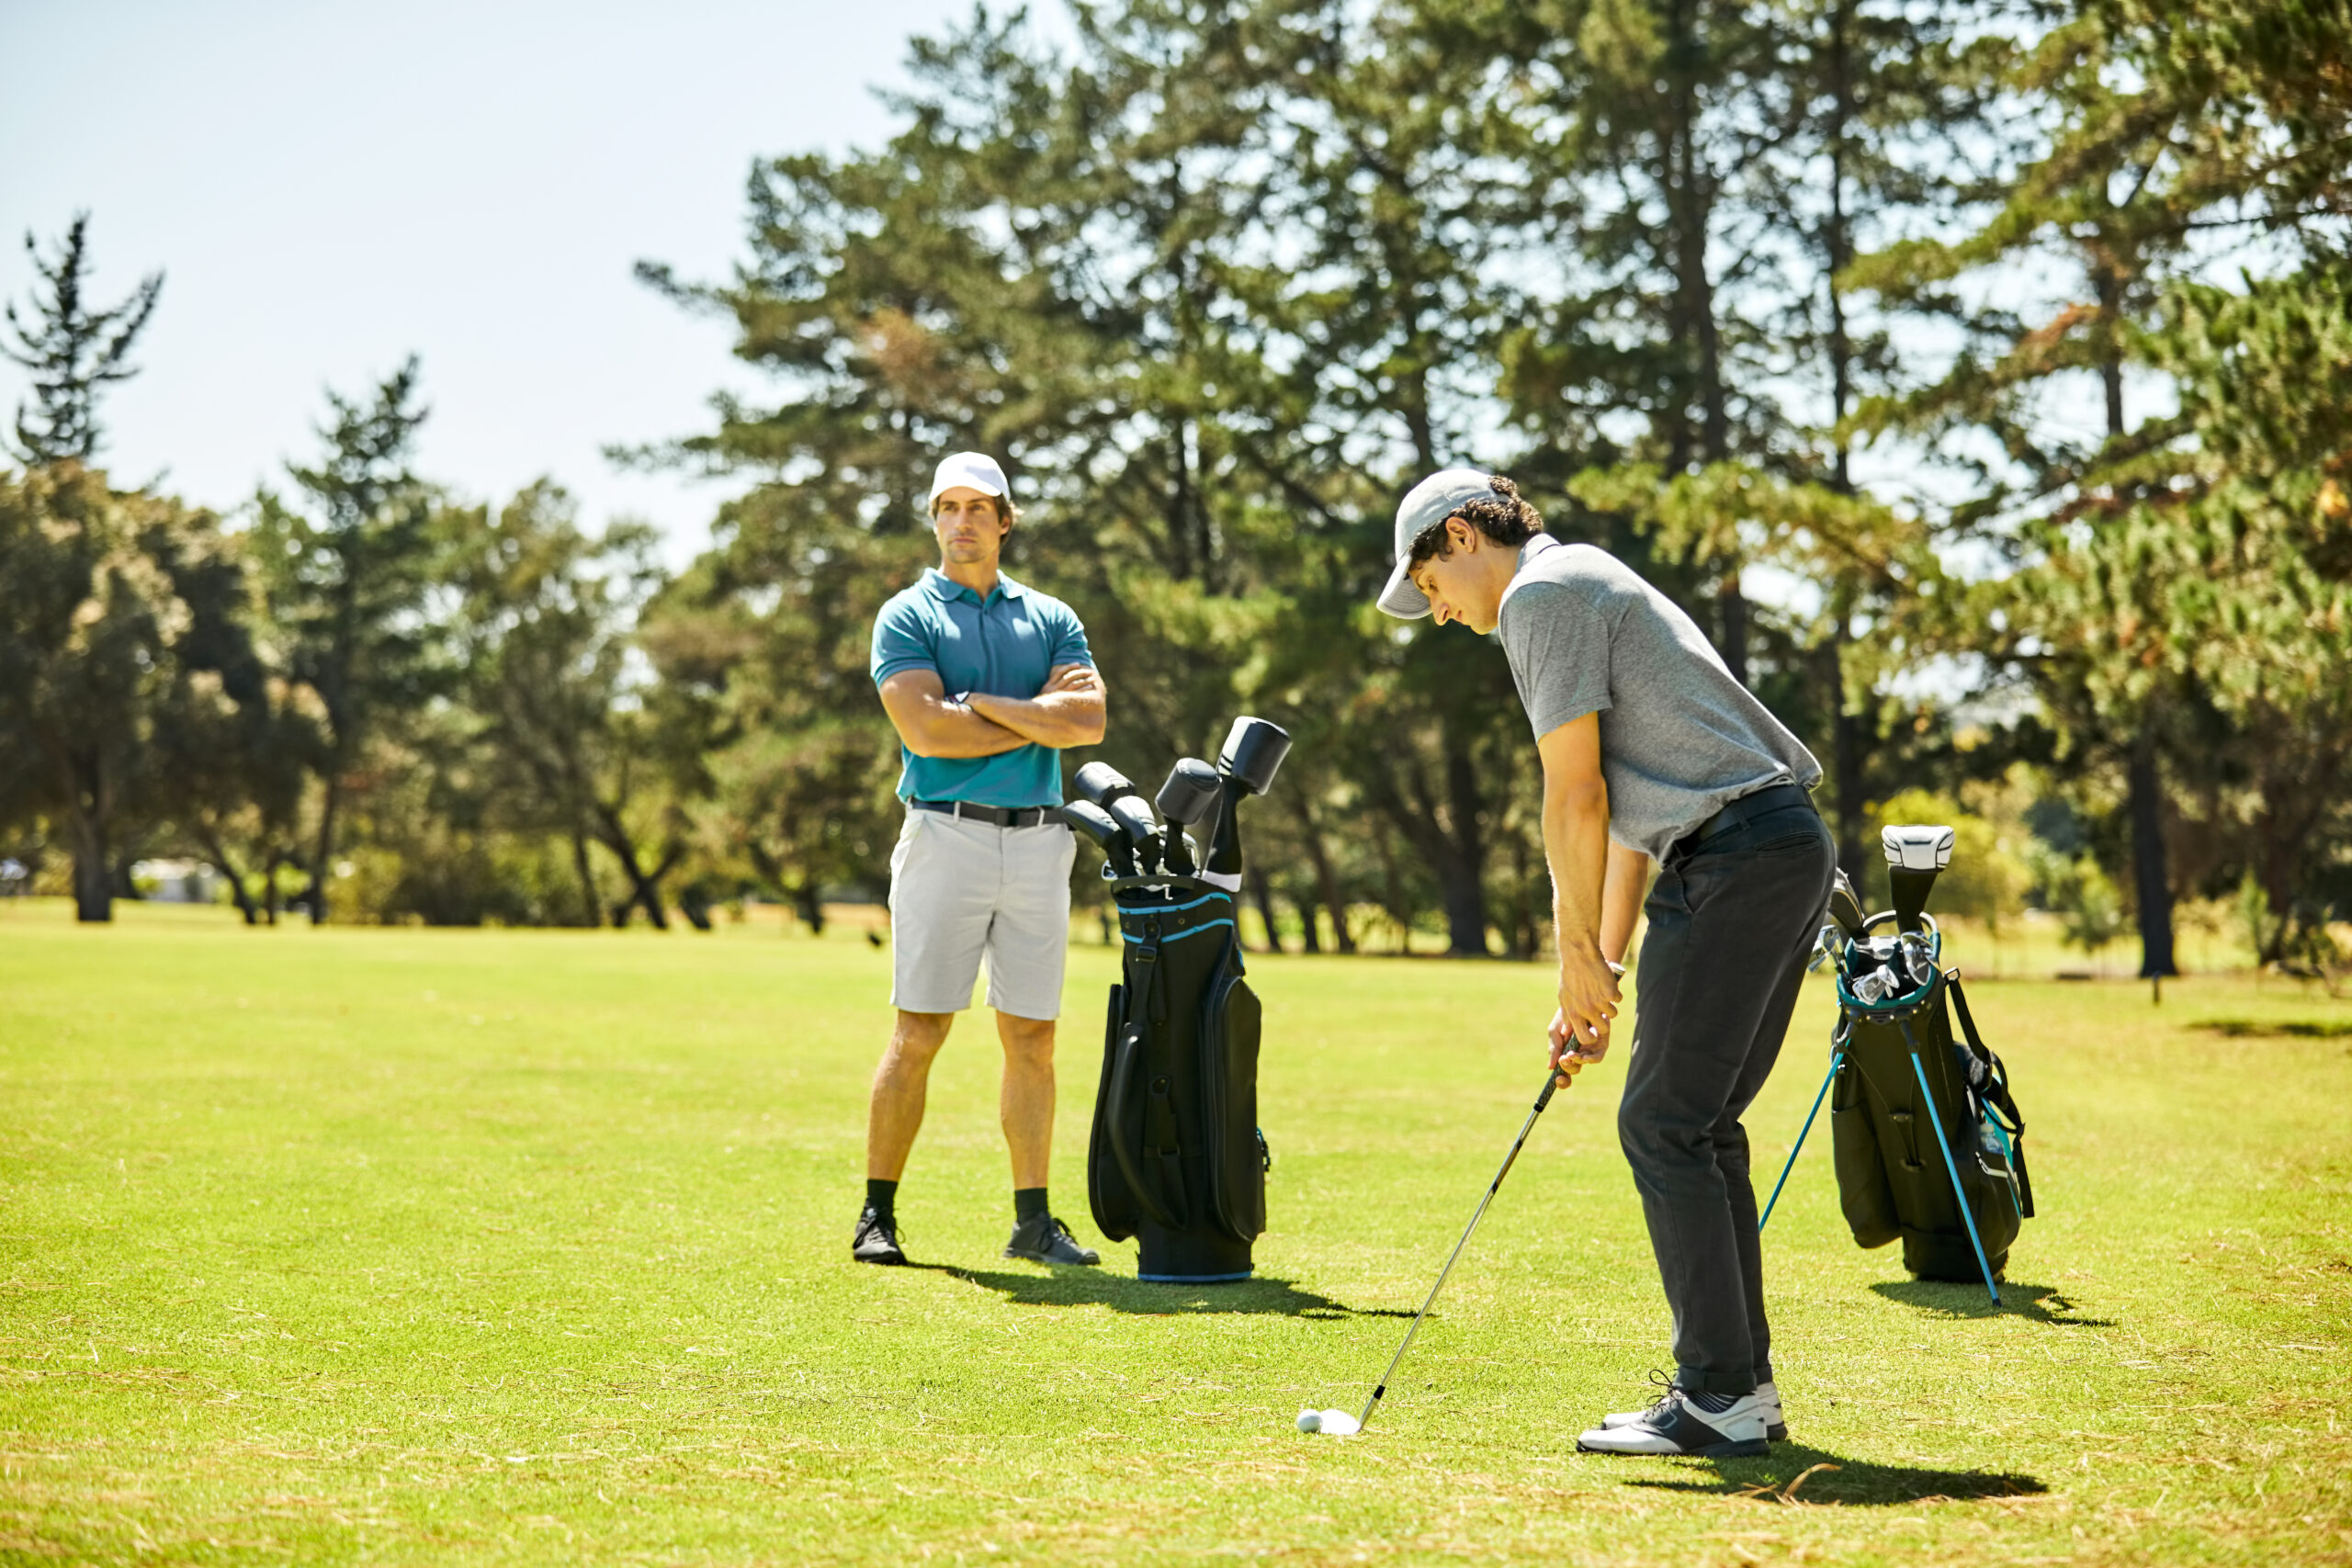 Side view of male golfer playing on field during sunny day. Young man is taking shot with golf club while friend standing in background. They are in sportswear.